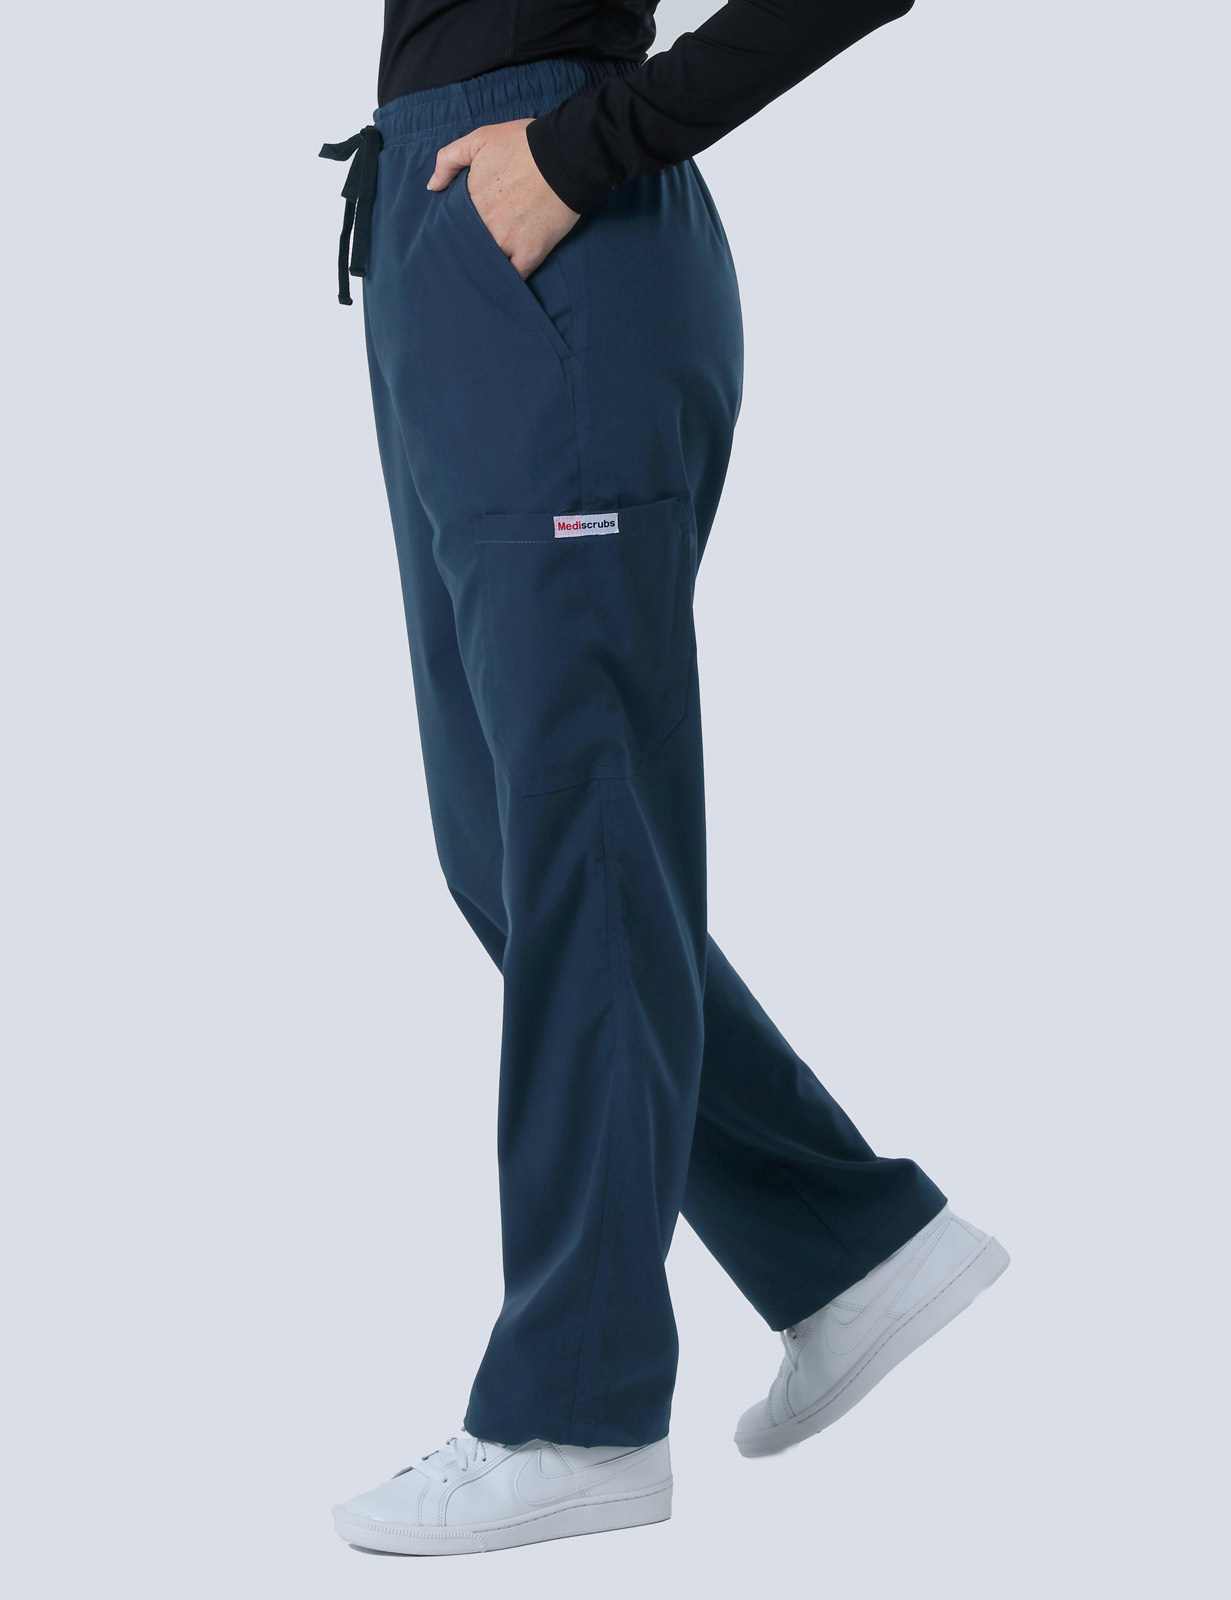 Frankston - AAAU/CNS (4 Pocket Scrub Top and Cargo Pants in Navy incl Logos)